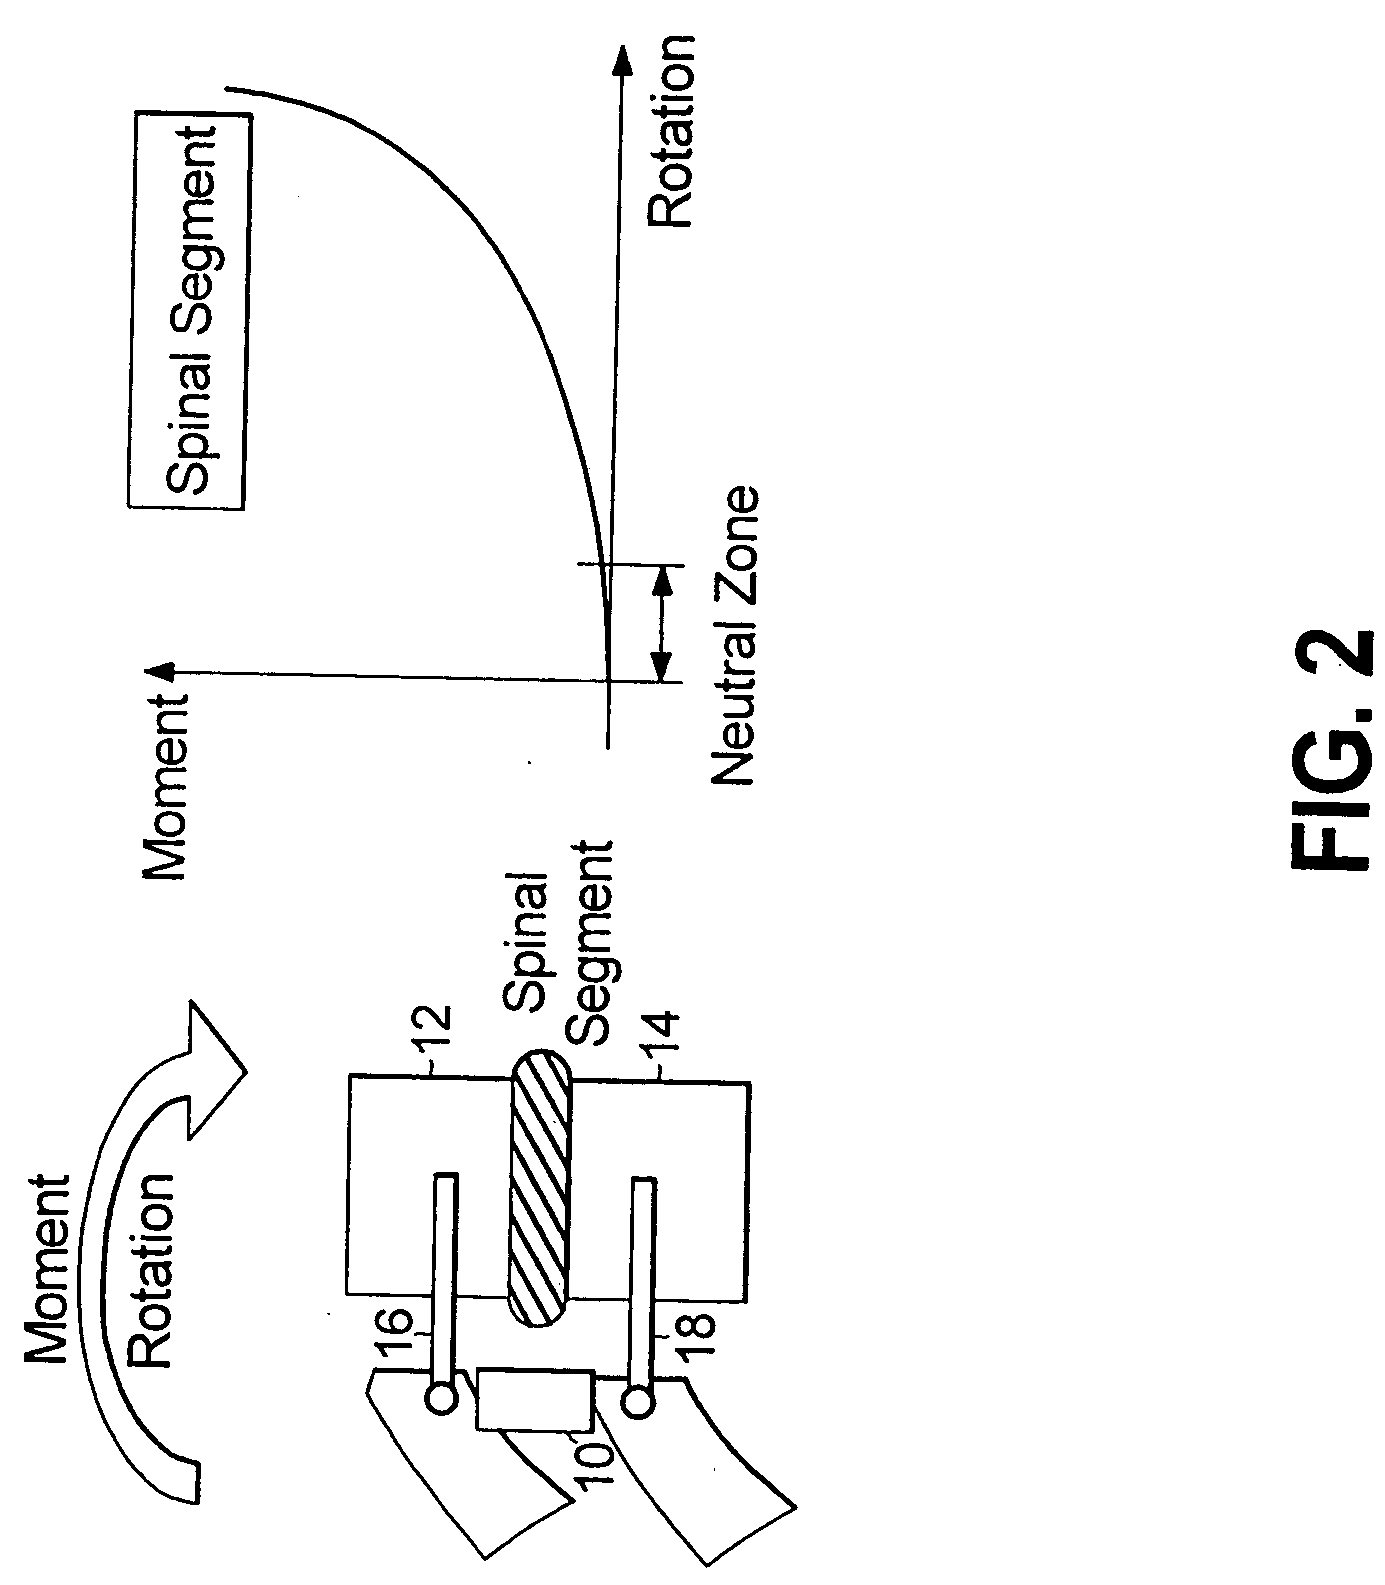 Spine stabilization systems, devices and methods